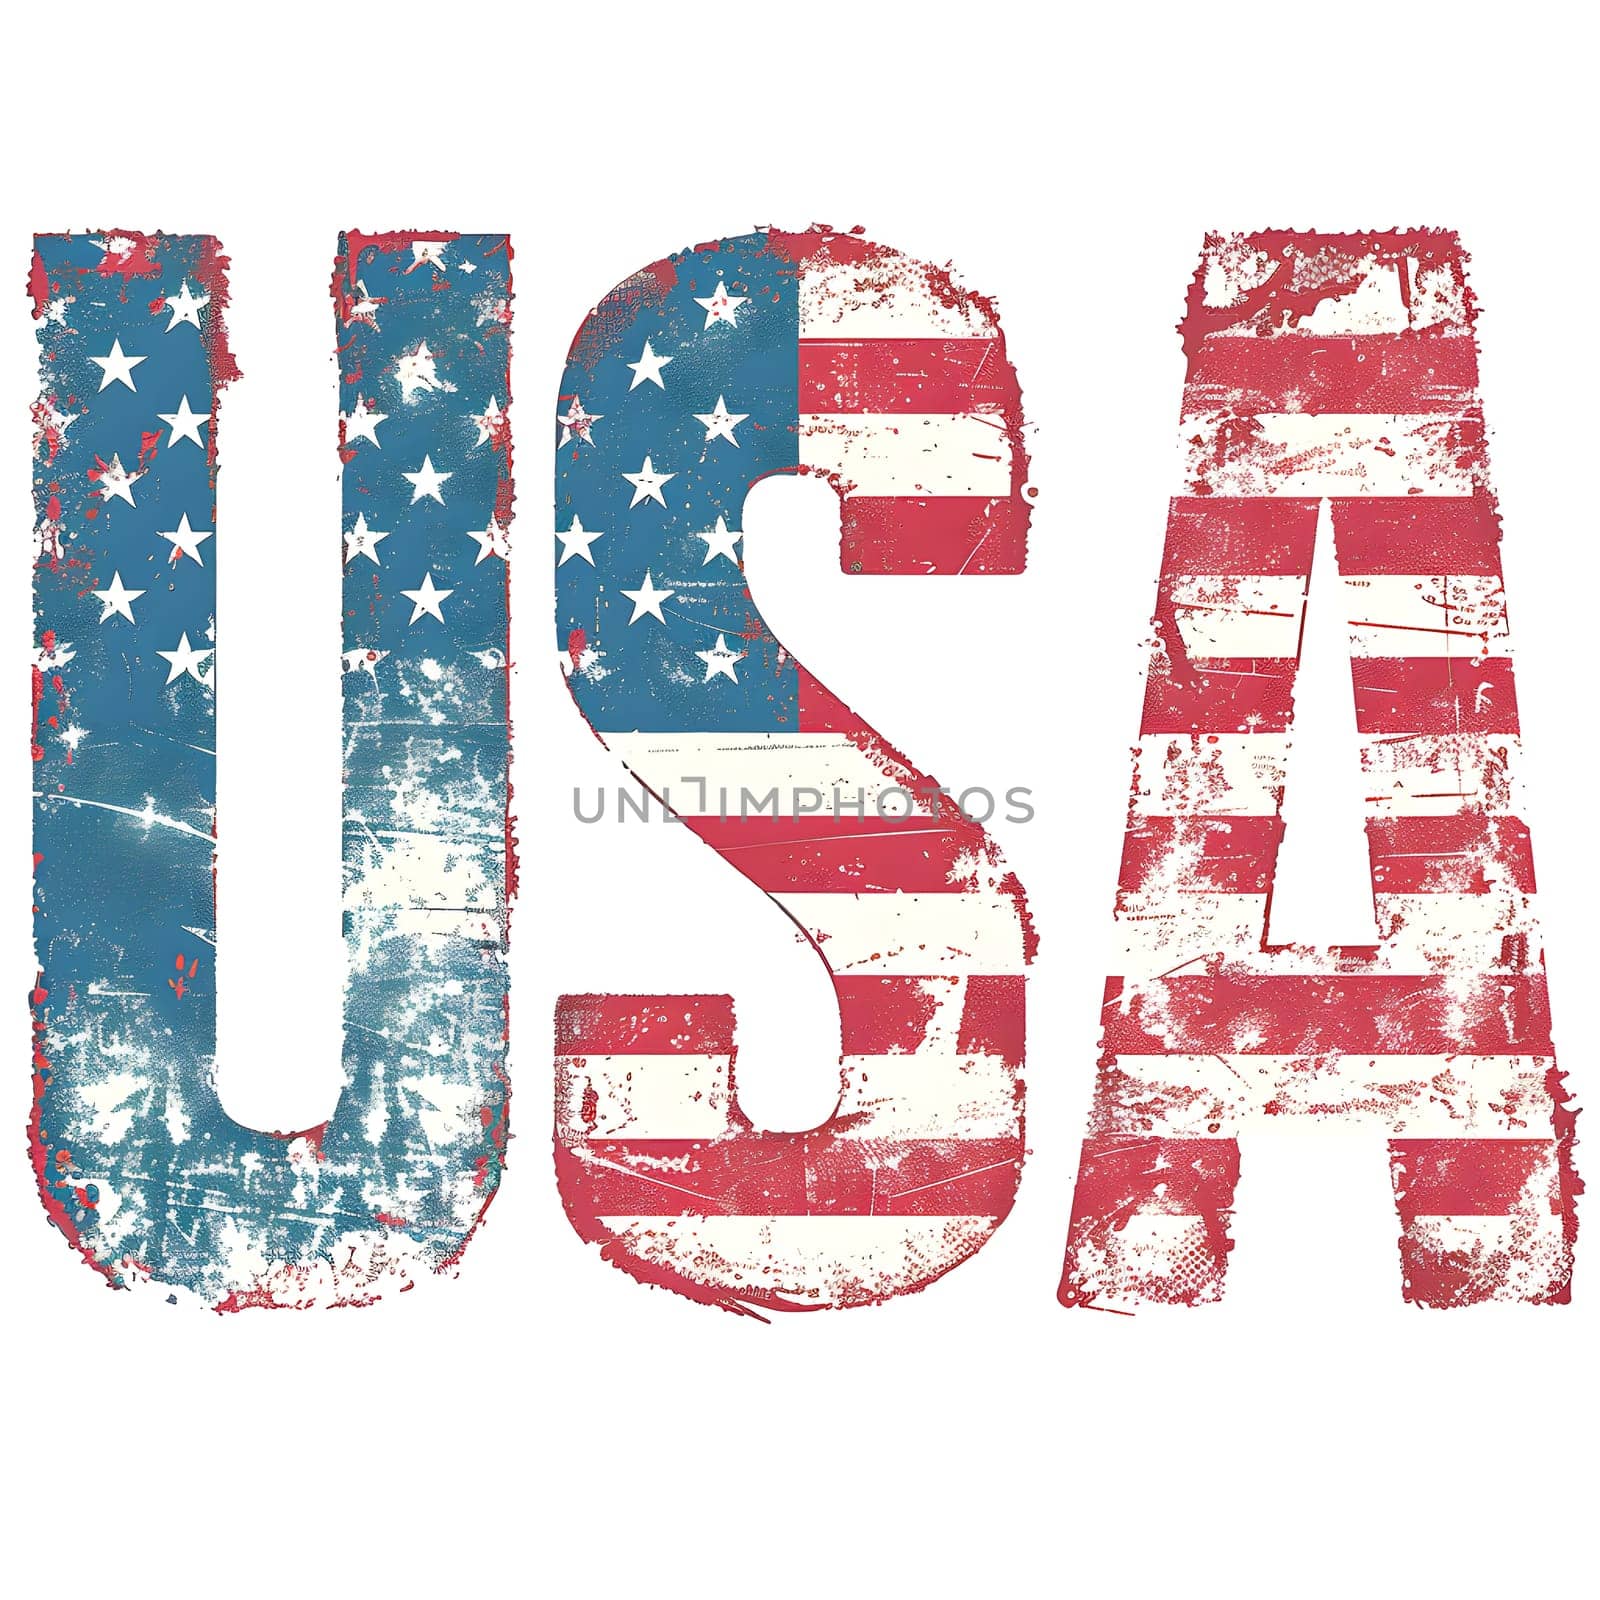 The word USA is elegantly displayed in electric blue and carmine colors, resembling the American flag. The font and graphics create a patriotic symbol within a rectangular art pattern